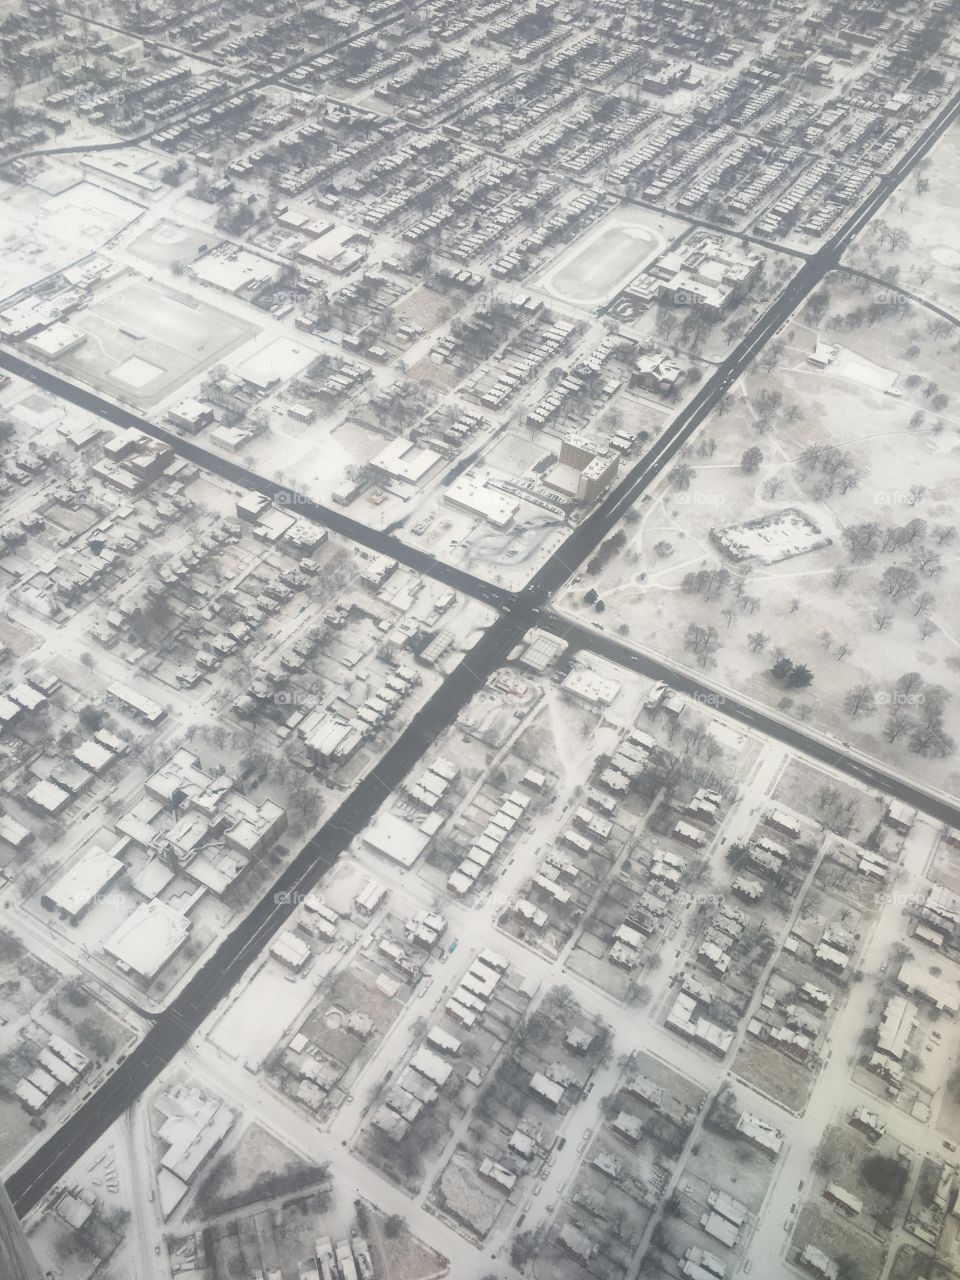 A aerial view of St. Louis in Winter.